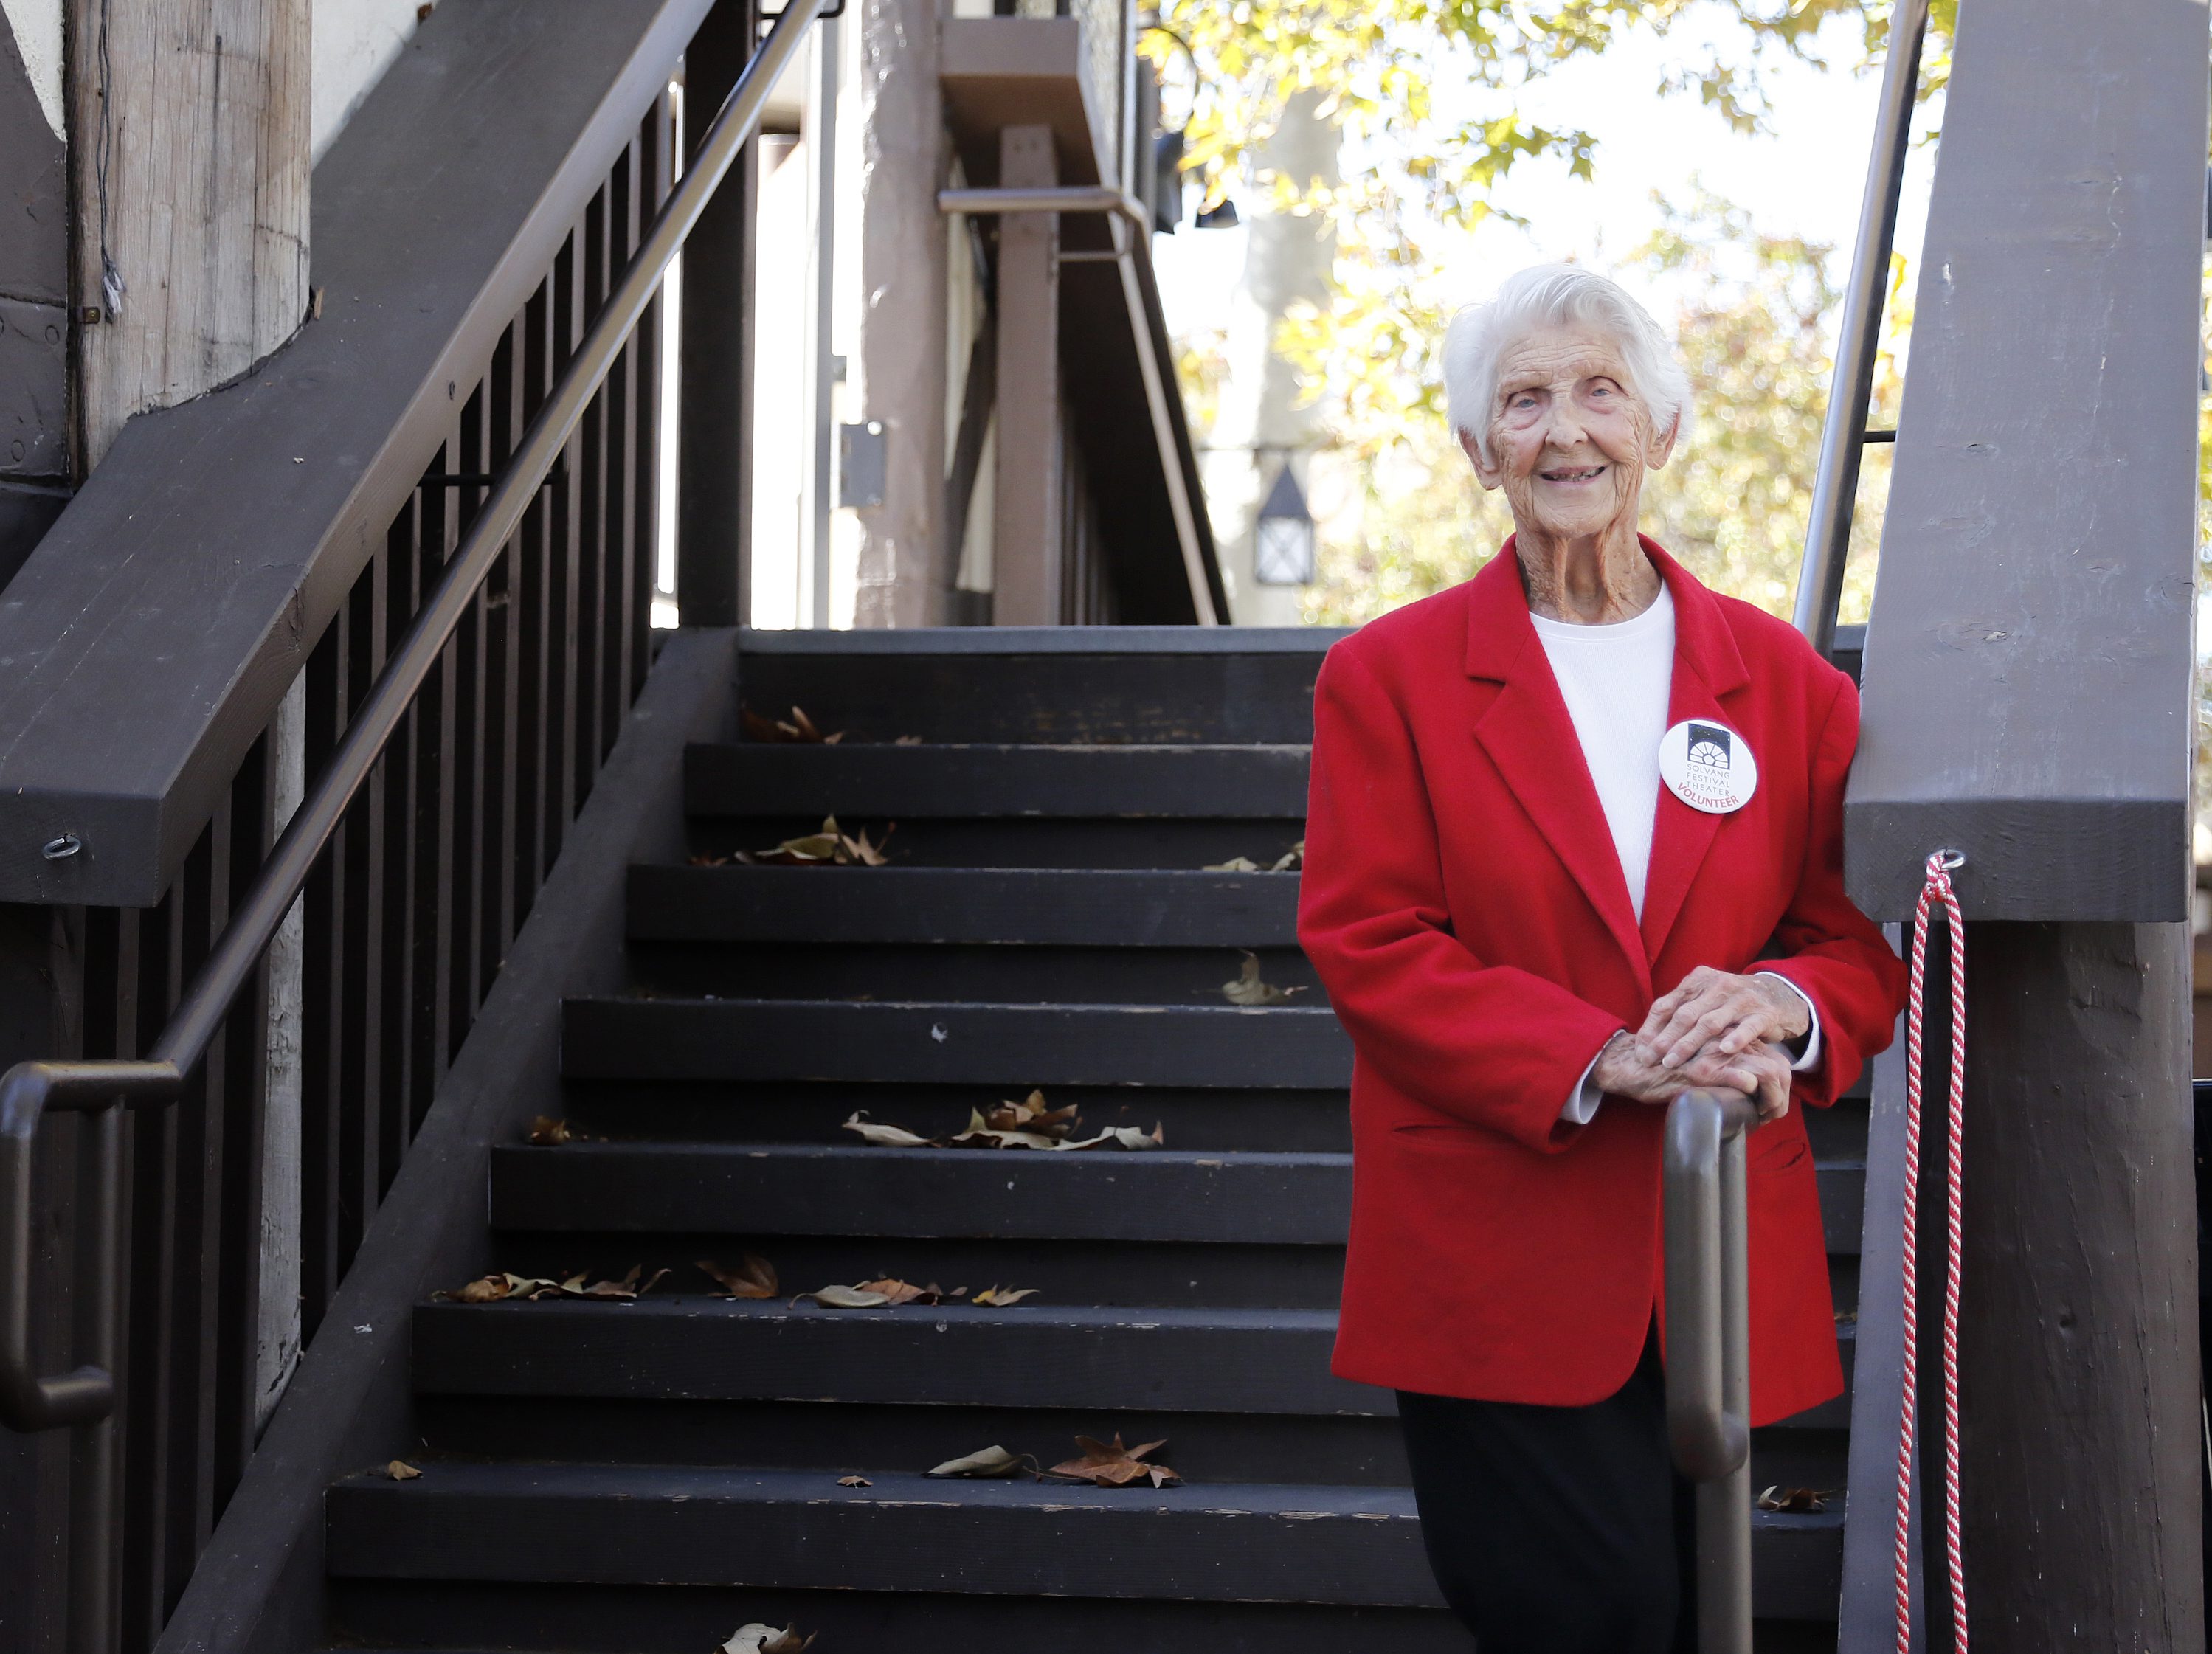 Theaterfest volunteer turning 100 years young